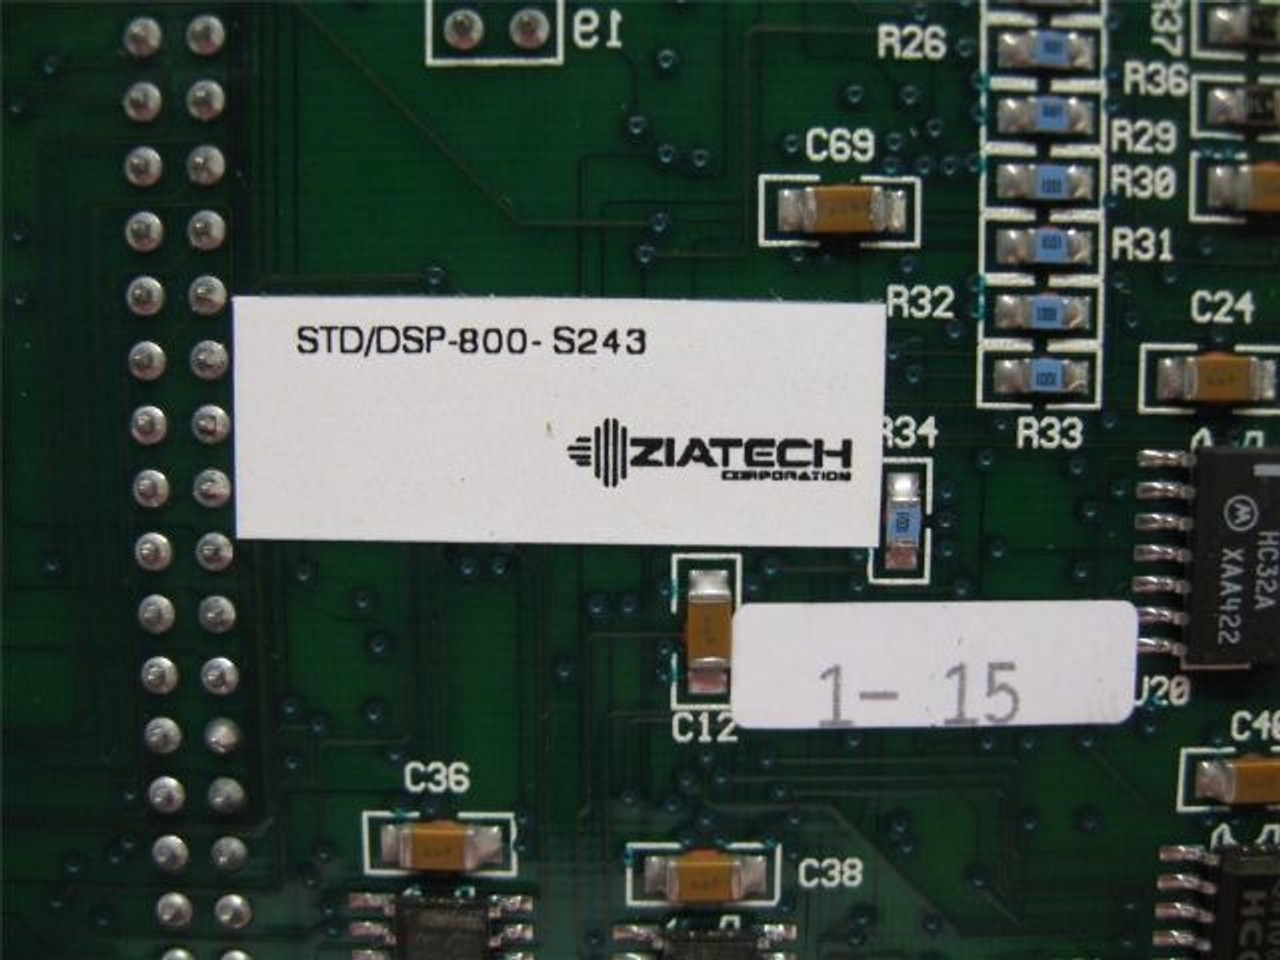 Ziatech STD/DSP-800-S243 Motion Engineering Inc. 8 Axis Motion Controller Rev. 6